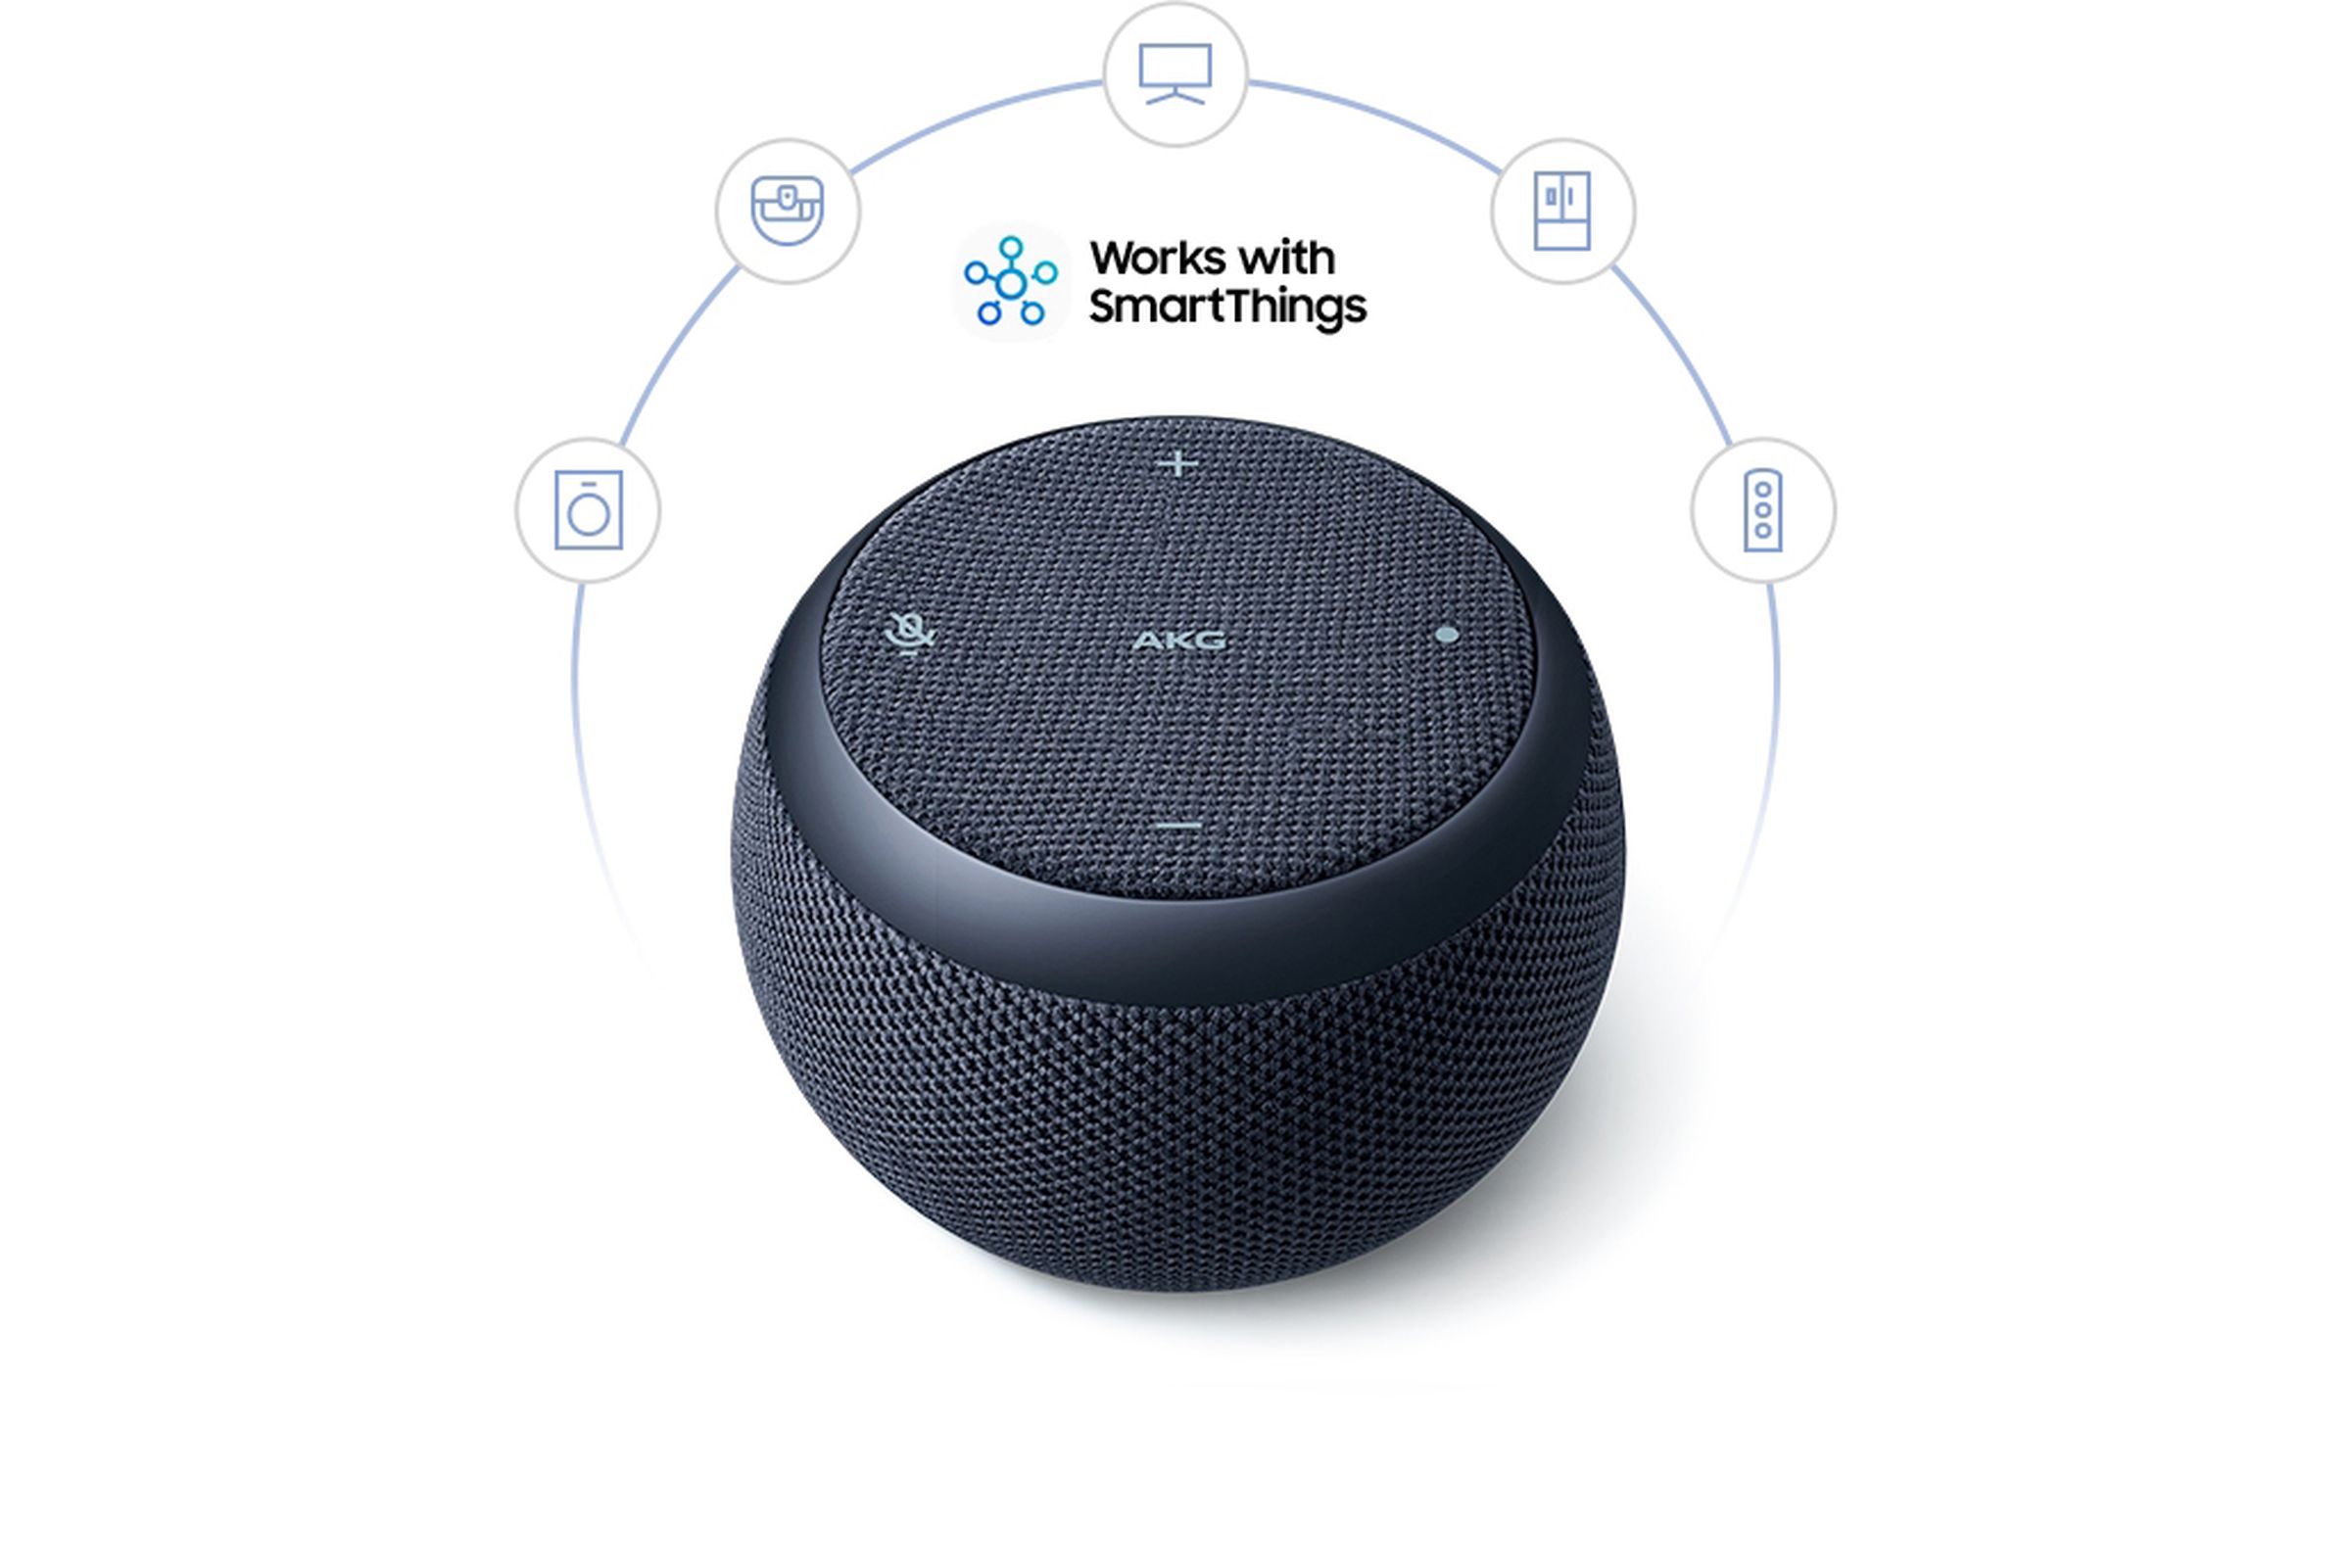 The speaker can control Samsung’s existing lineup of SmartThings devices.